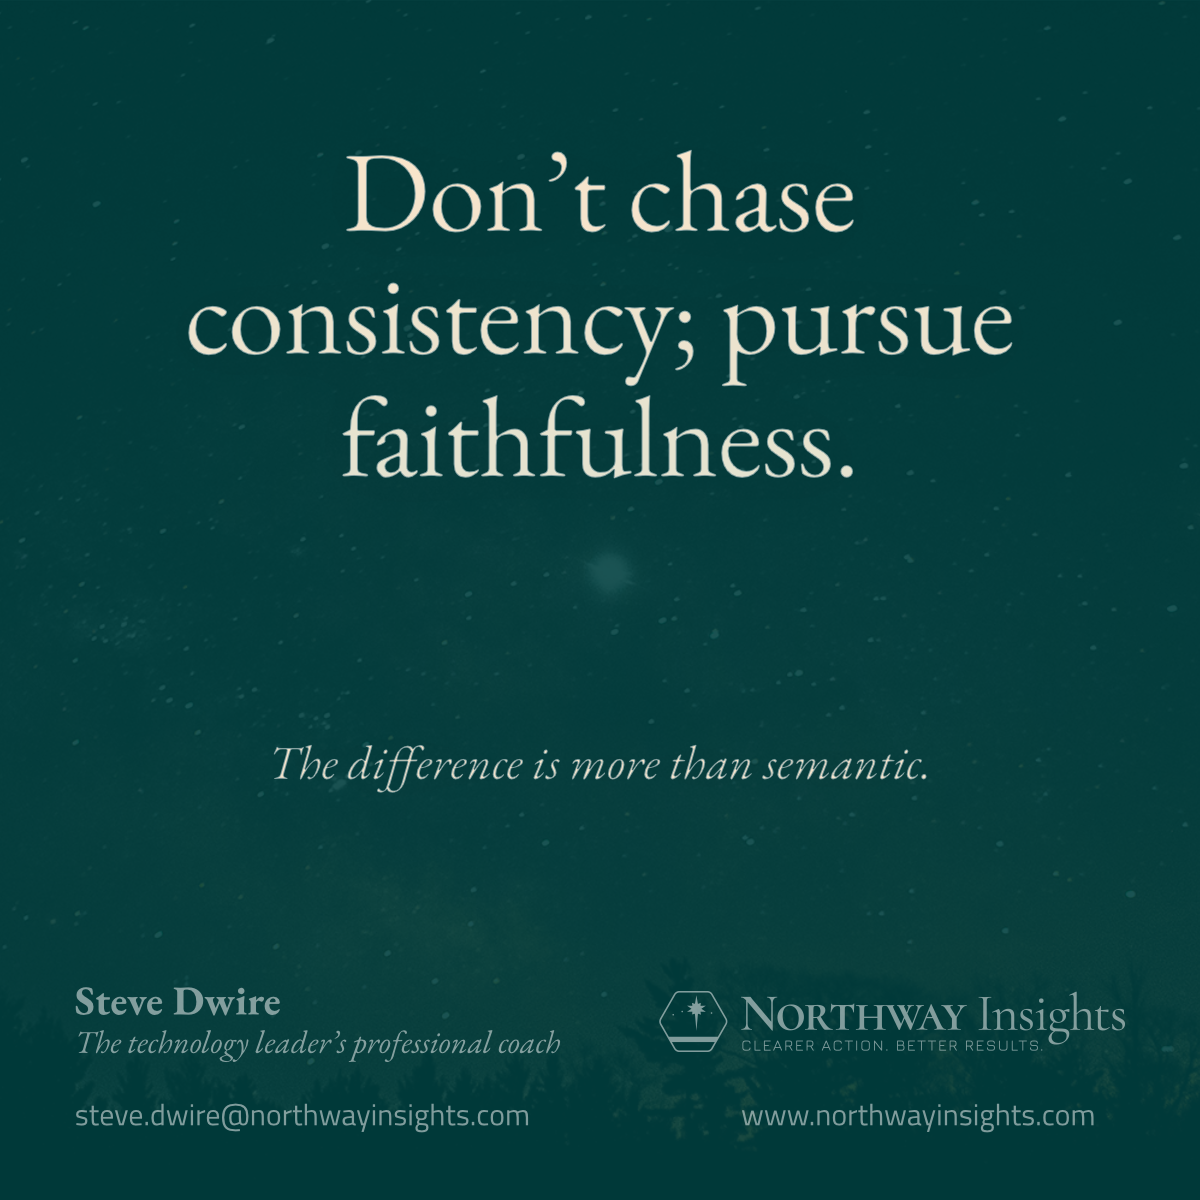 Don't chase consistency; pursue faithfulness. (The difference is more than semantic.)